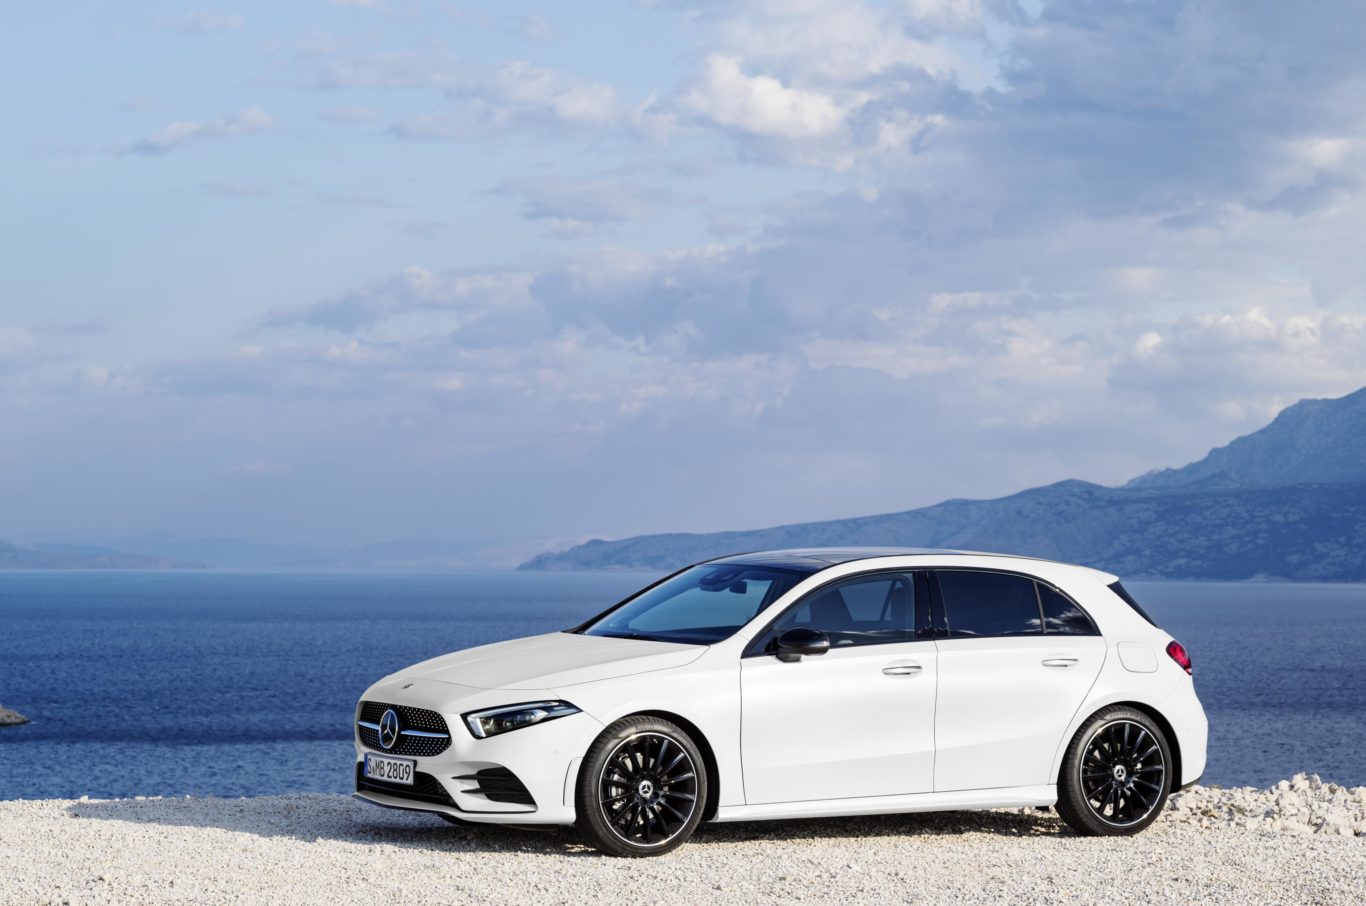 The new A-Class features a variety of cutting-edge safety tech